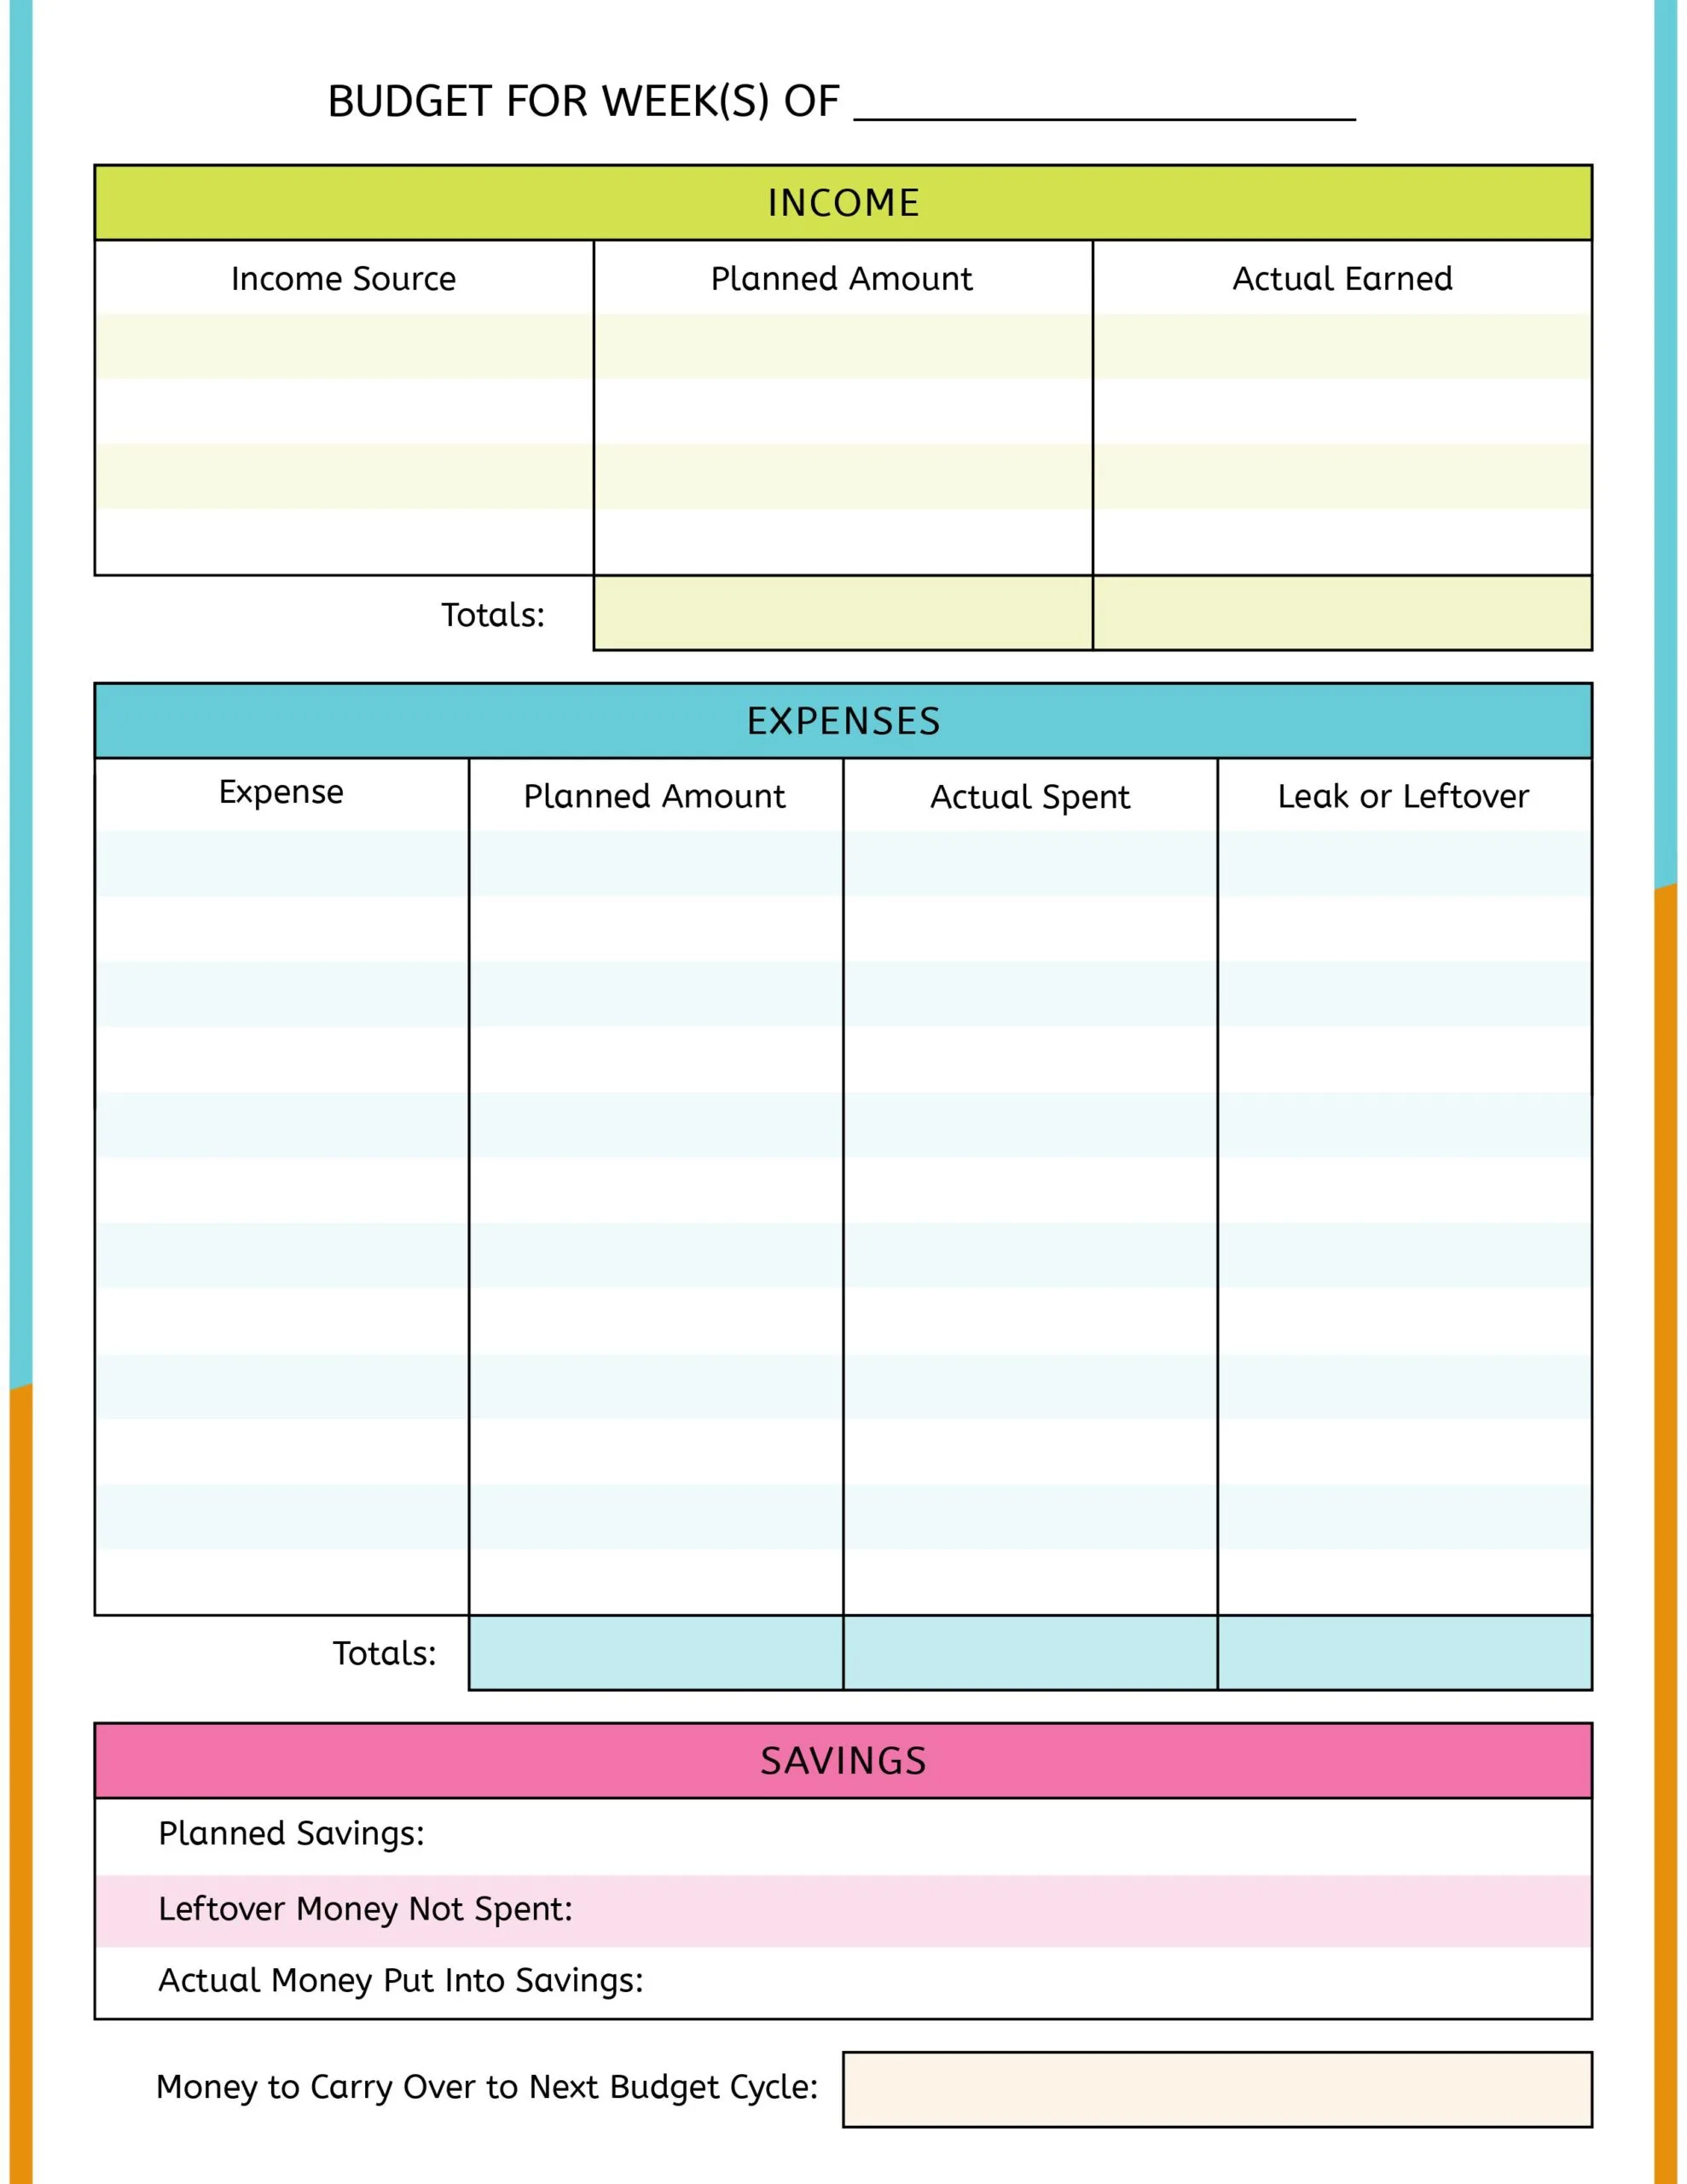 teen budget worksheet with blues, greens, orange, and pink, spot for income and expenses and savings - planned, actuals, and leak or leftovers